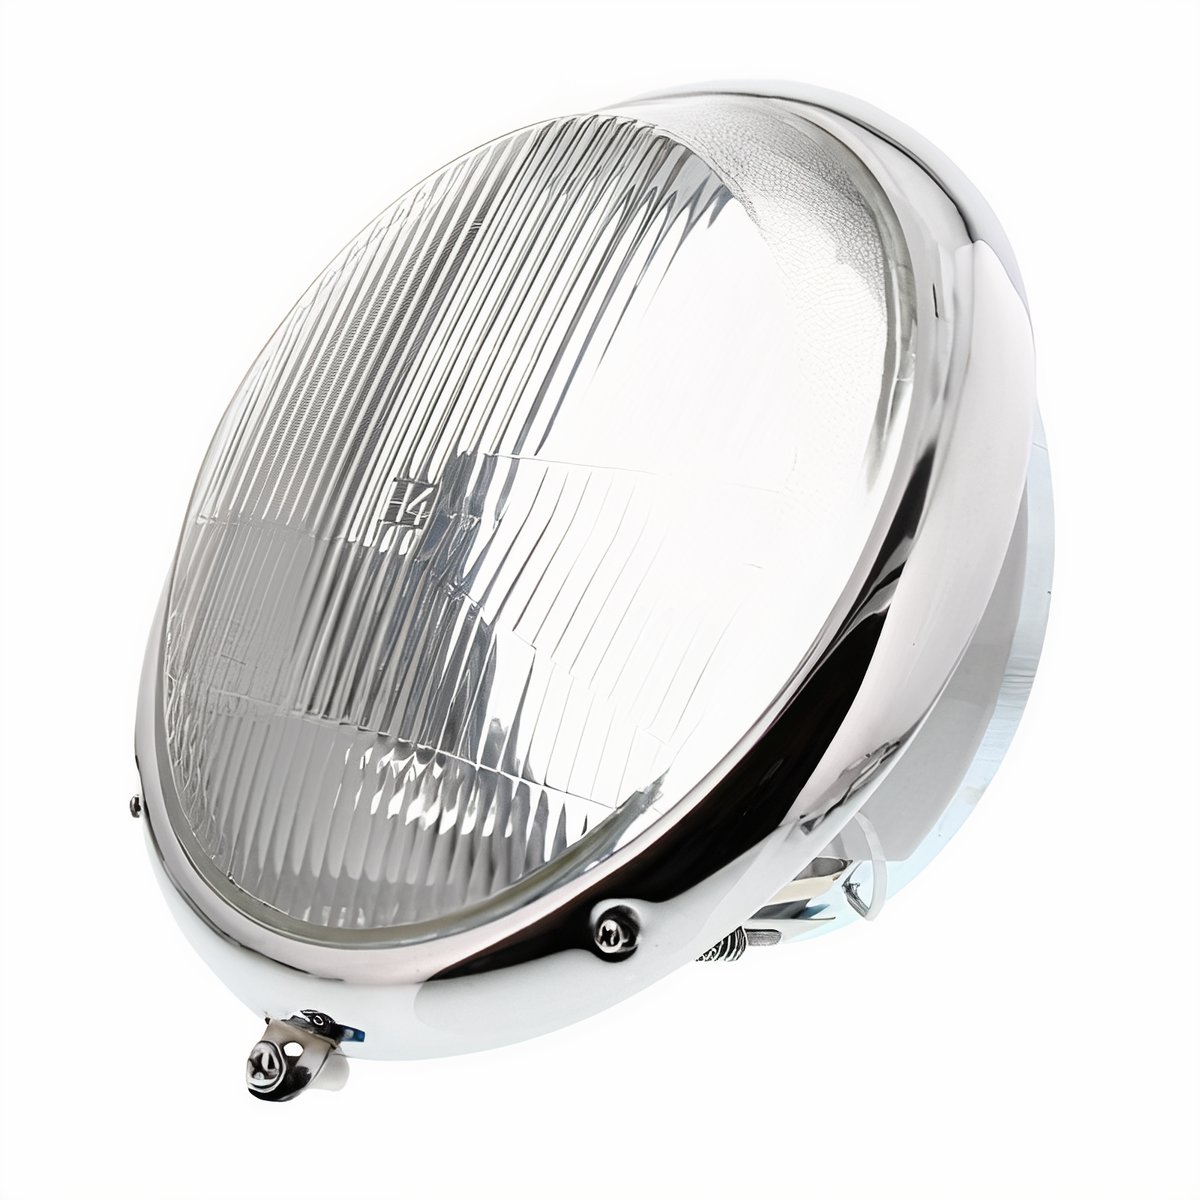 VW Headlight Assembly - Fluted Lens -1954-66 Beetle - 1956-67 Bus